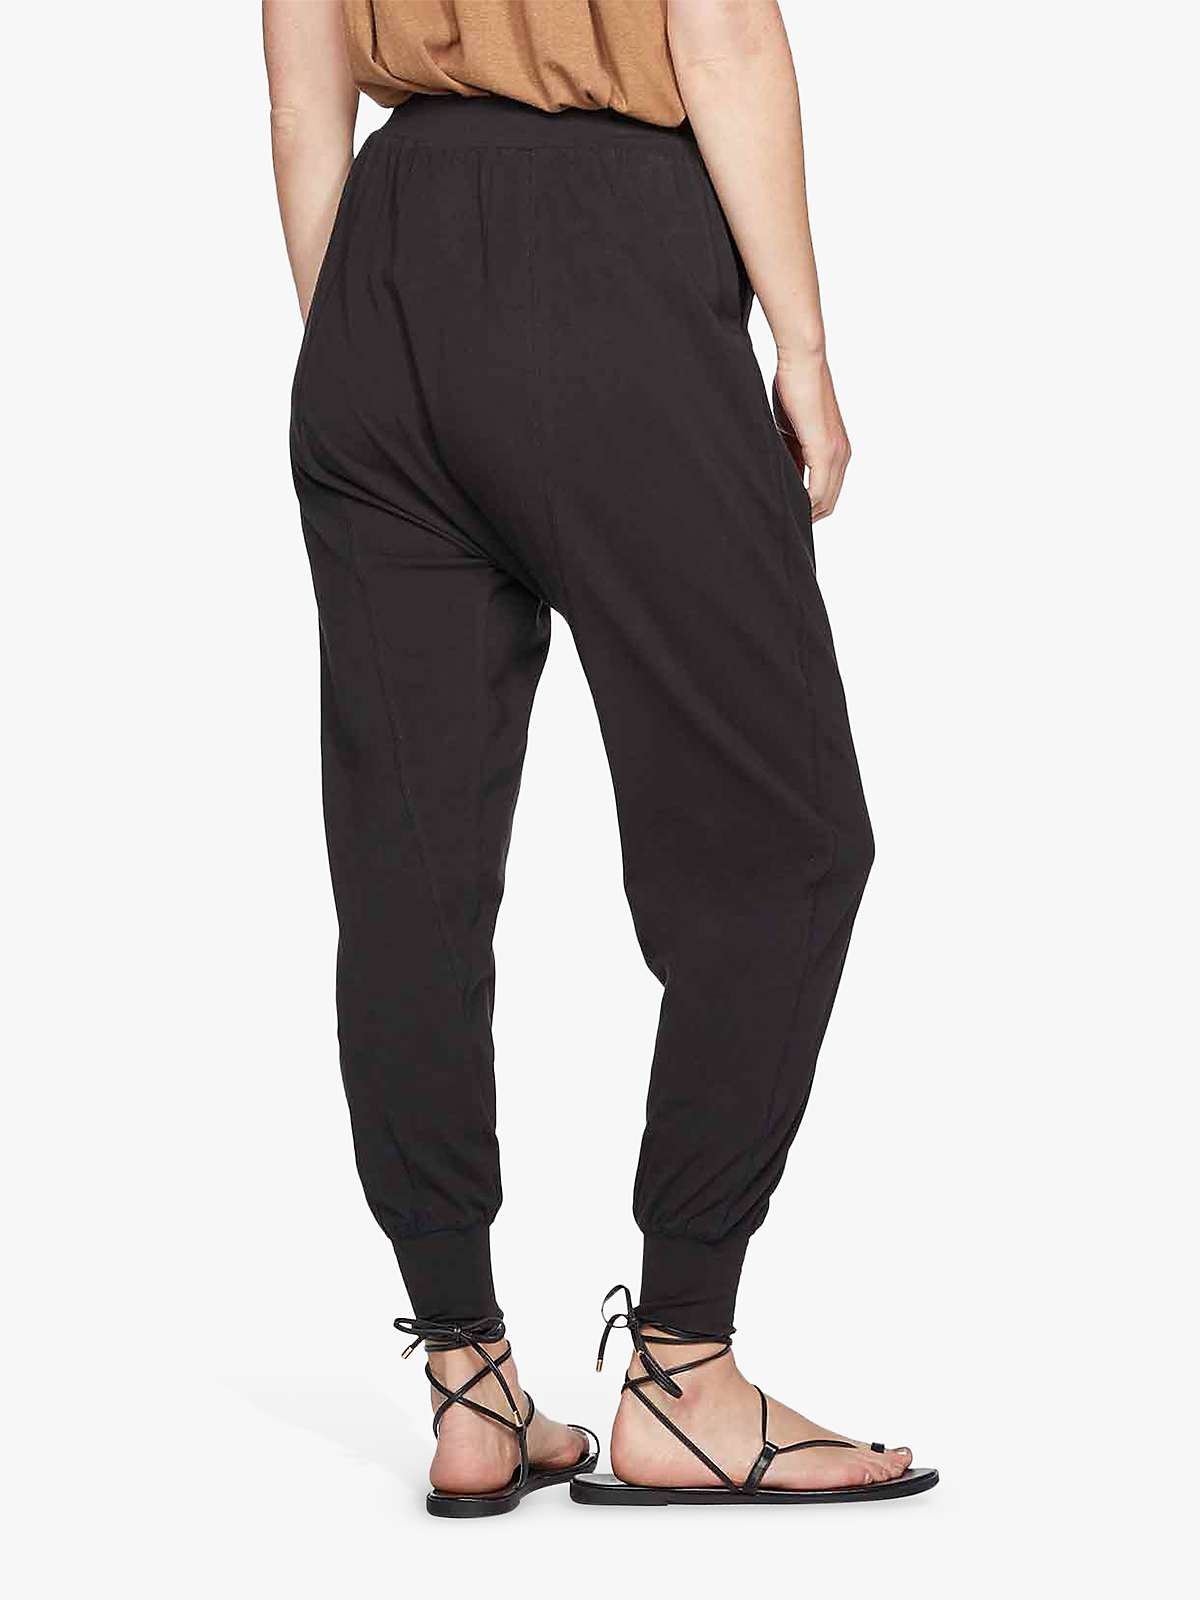 Buy Thought Chia Trousers, Black Online at johnlewis.com